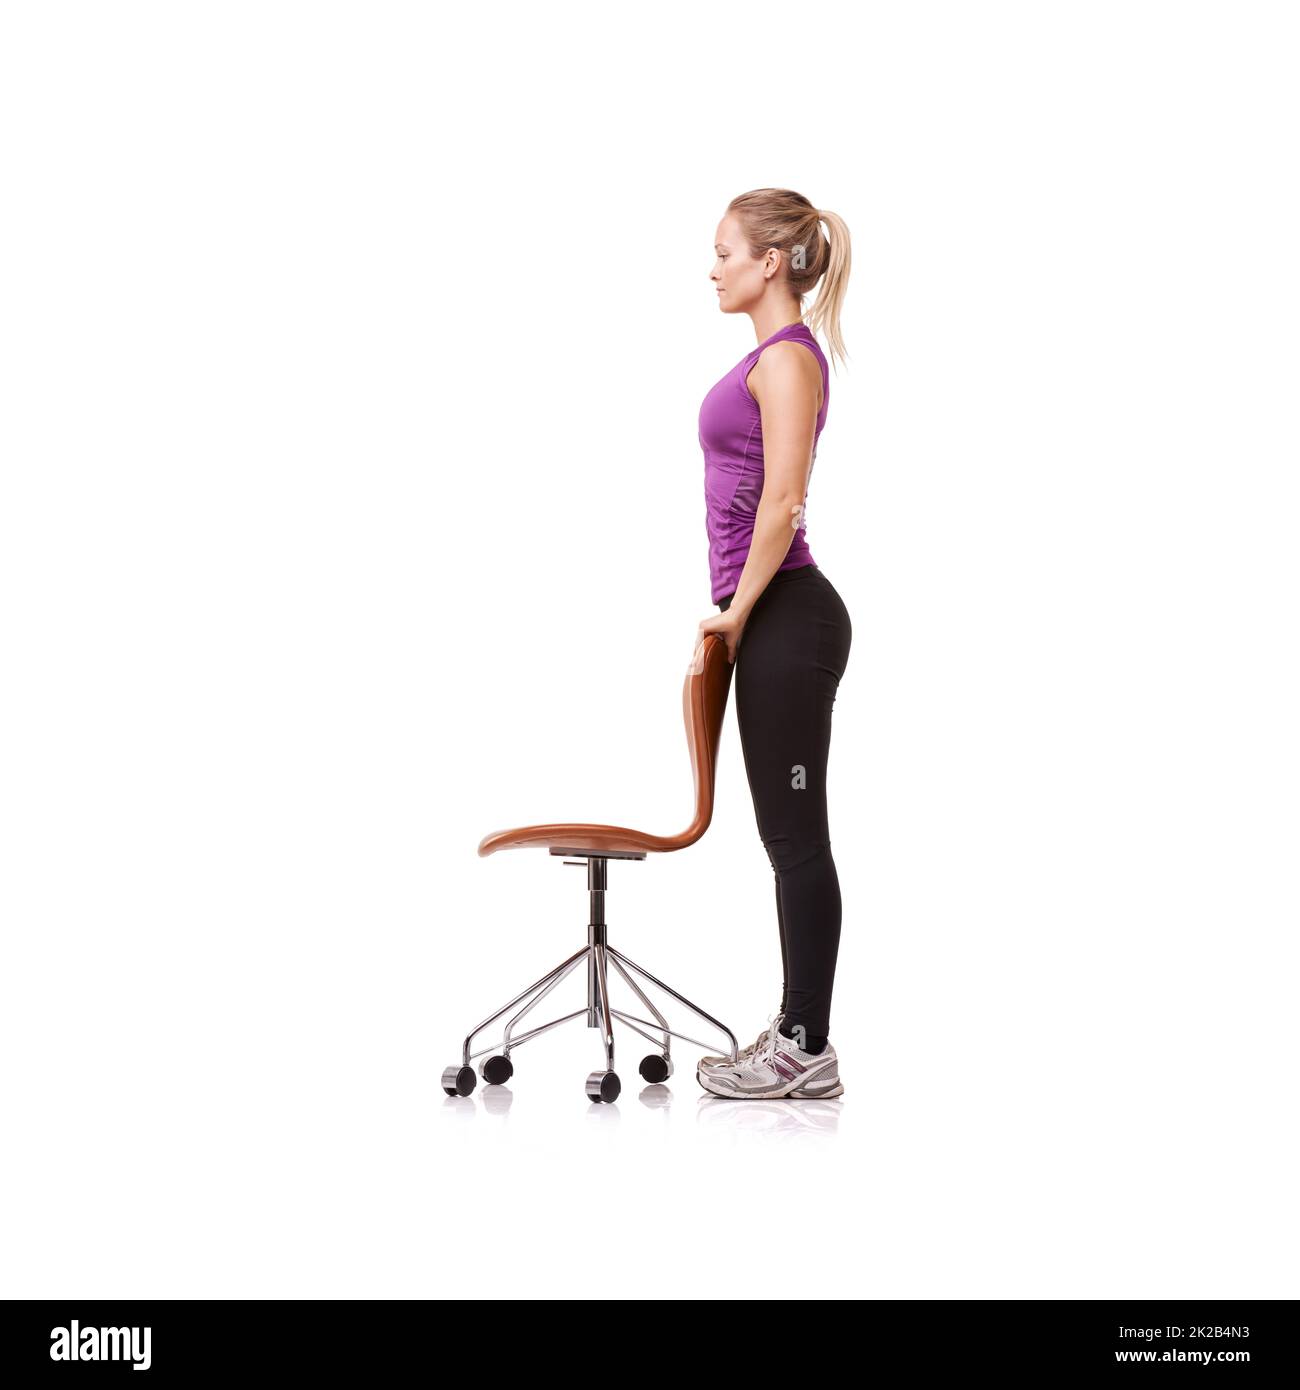 Standing strong. A beautiful young woman wearing gym clothes and standing while using a chair for support against a white background. Stock Photo